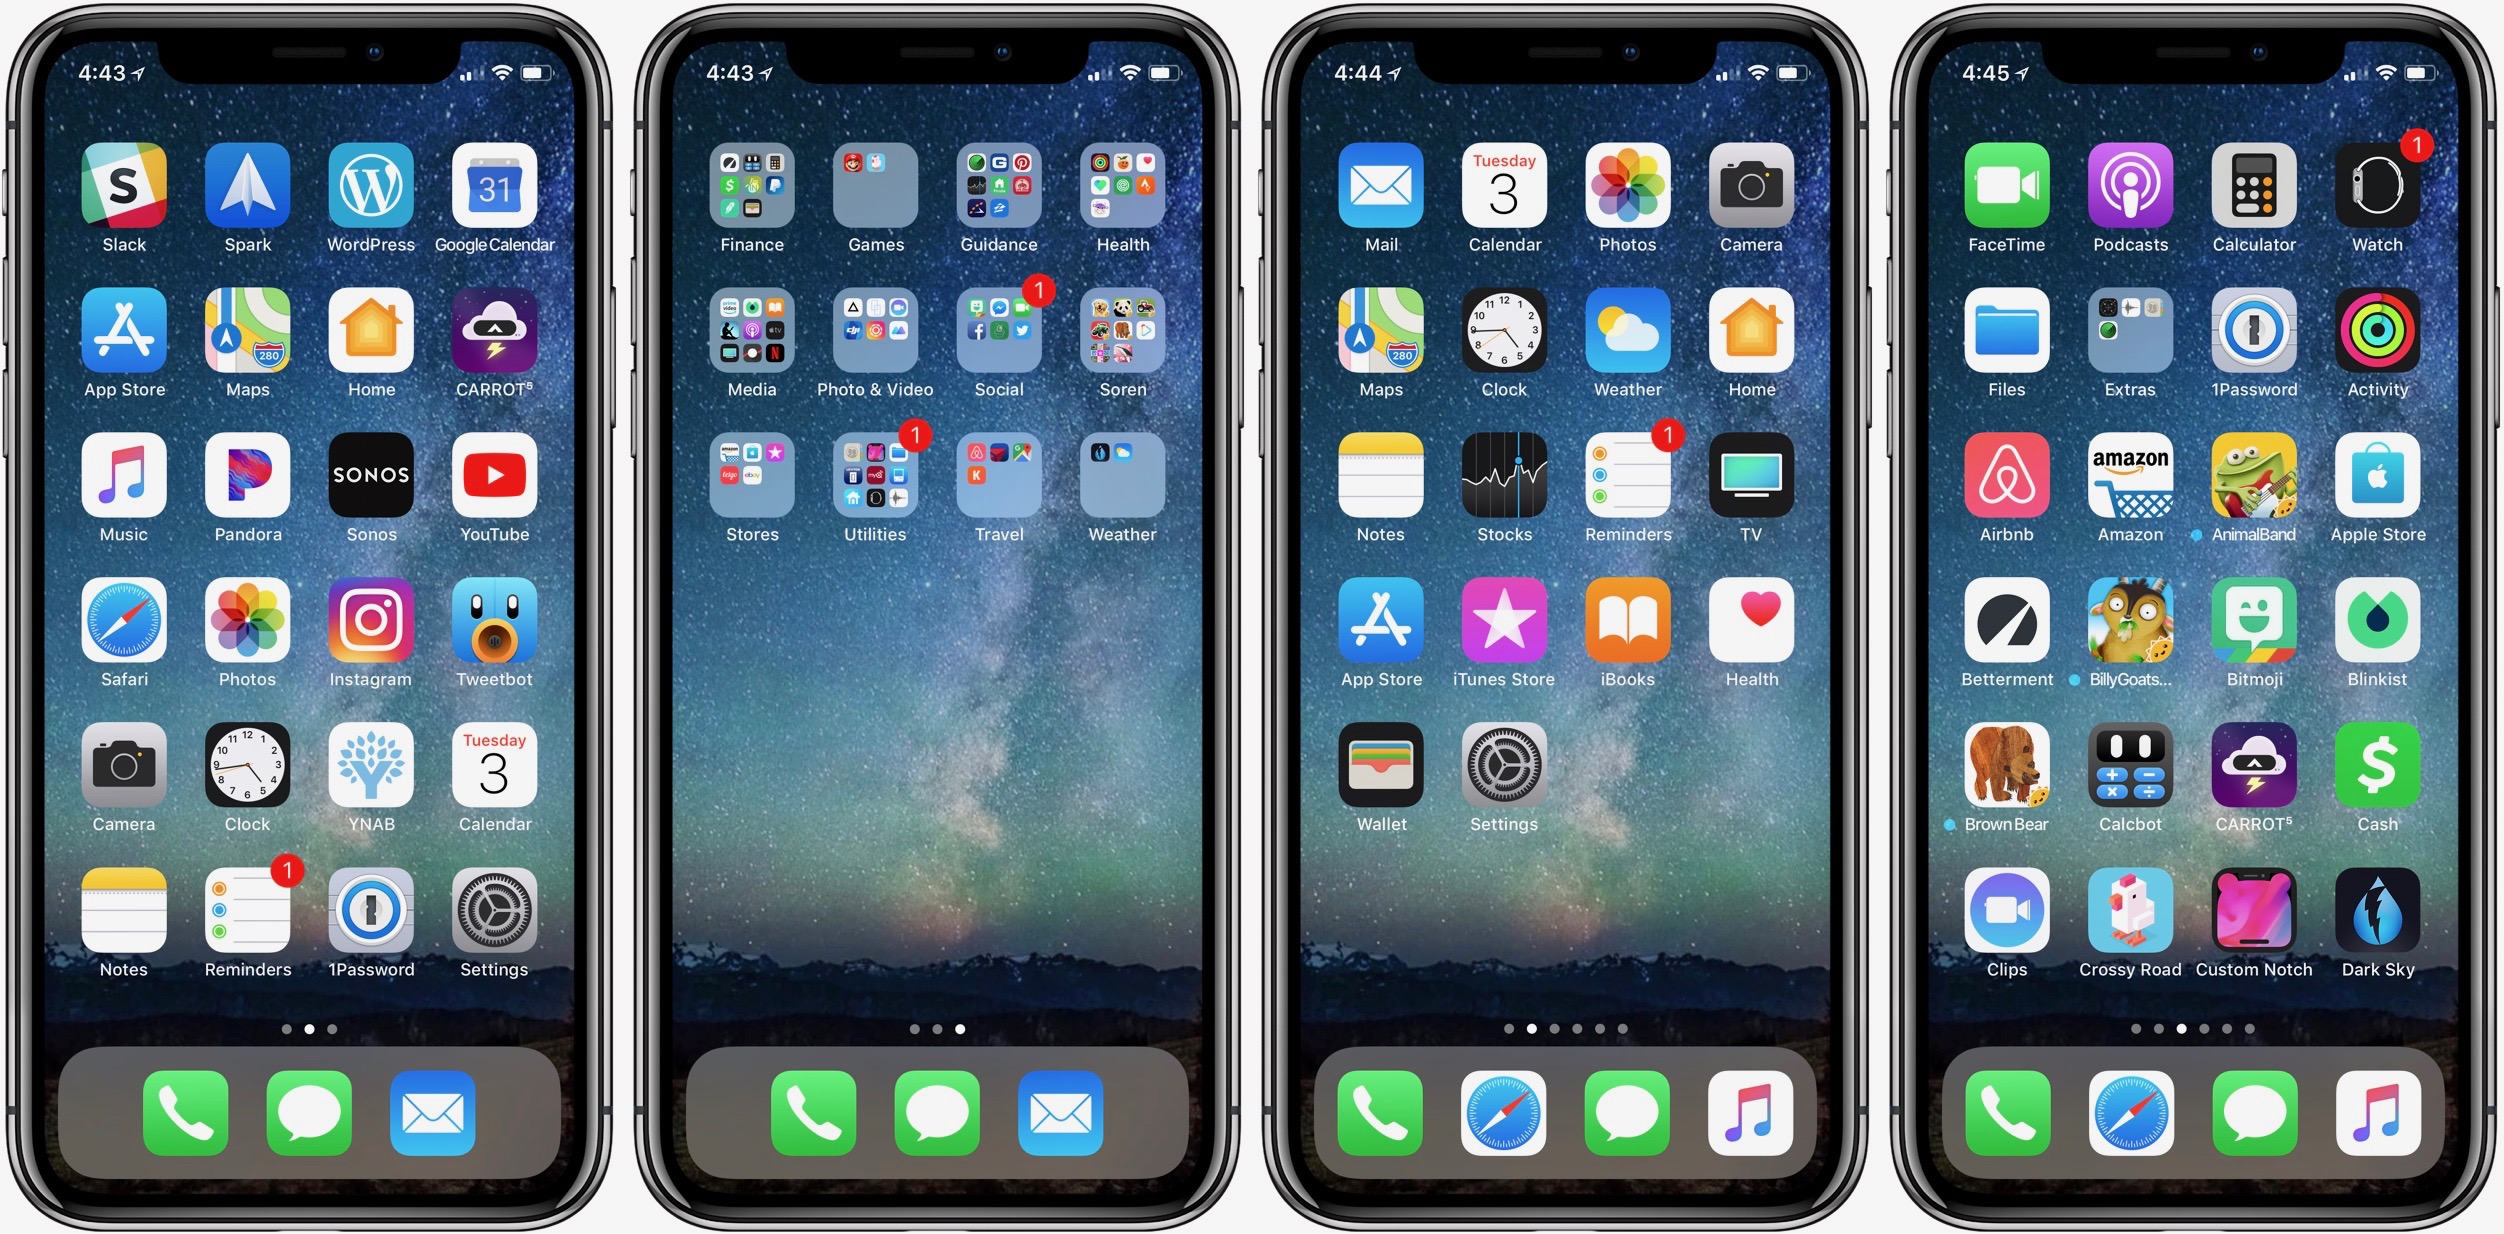 How to restore the default Home screen layout on iPhone and iPad 9to5Mac